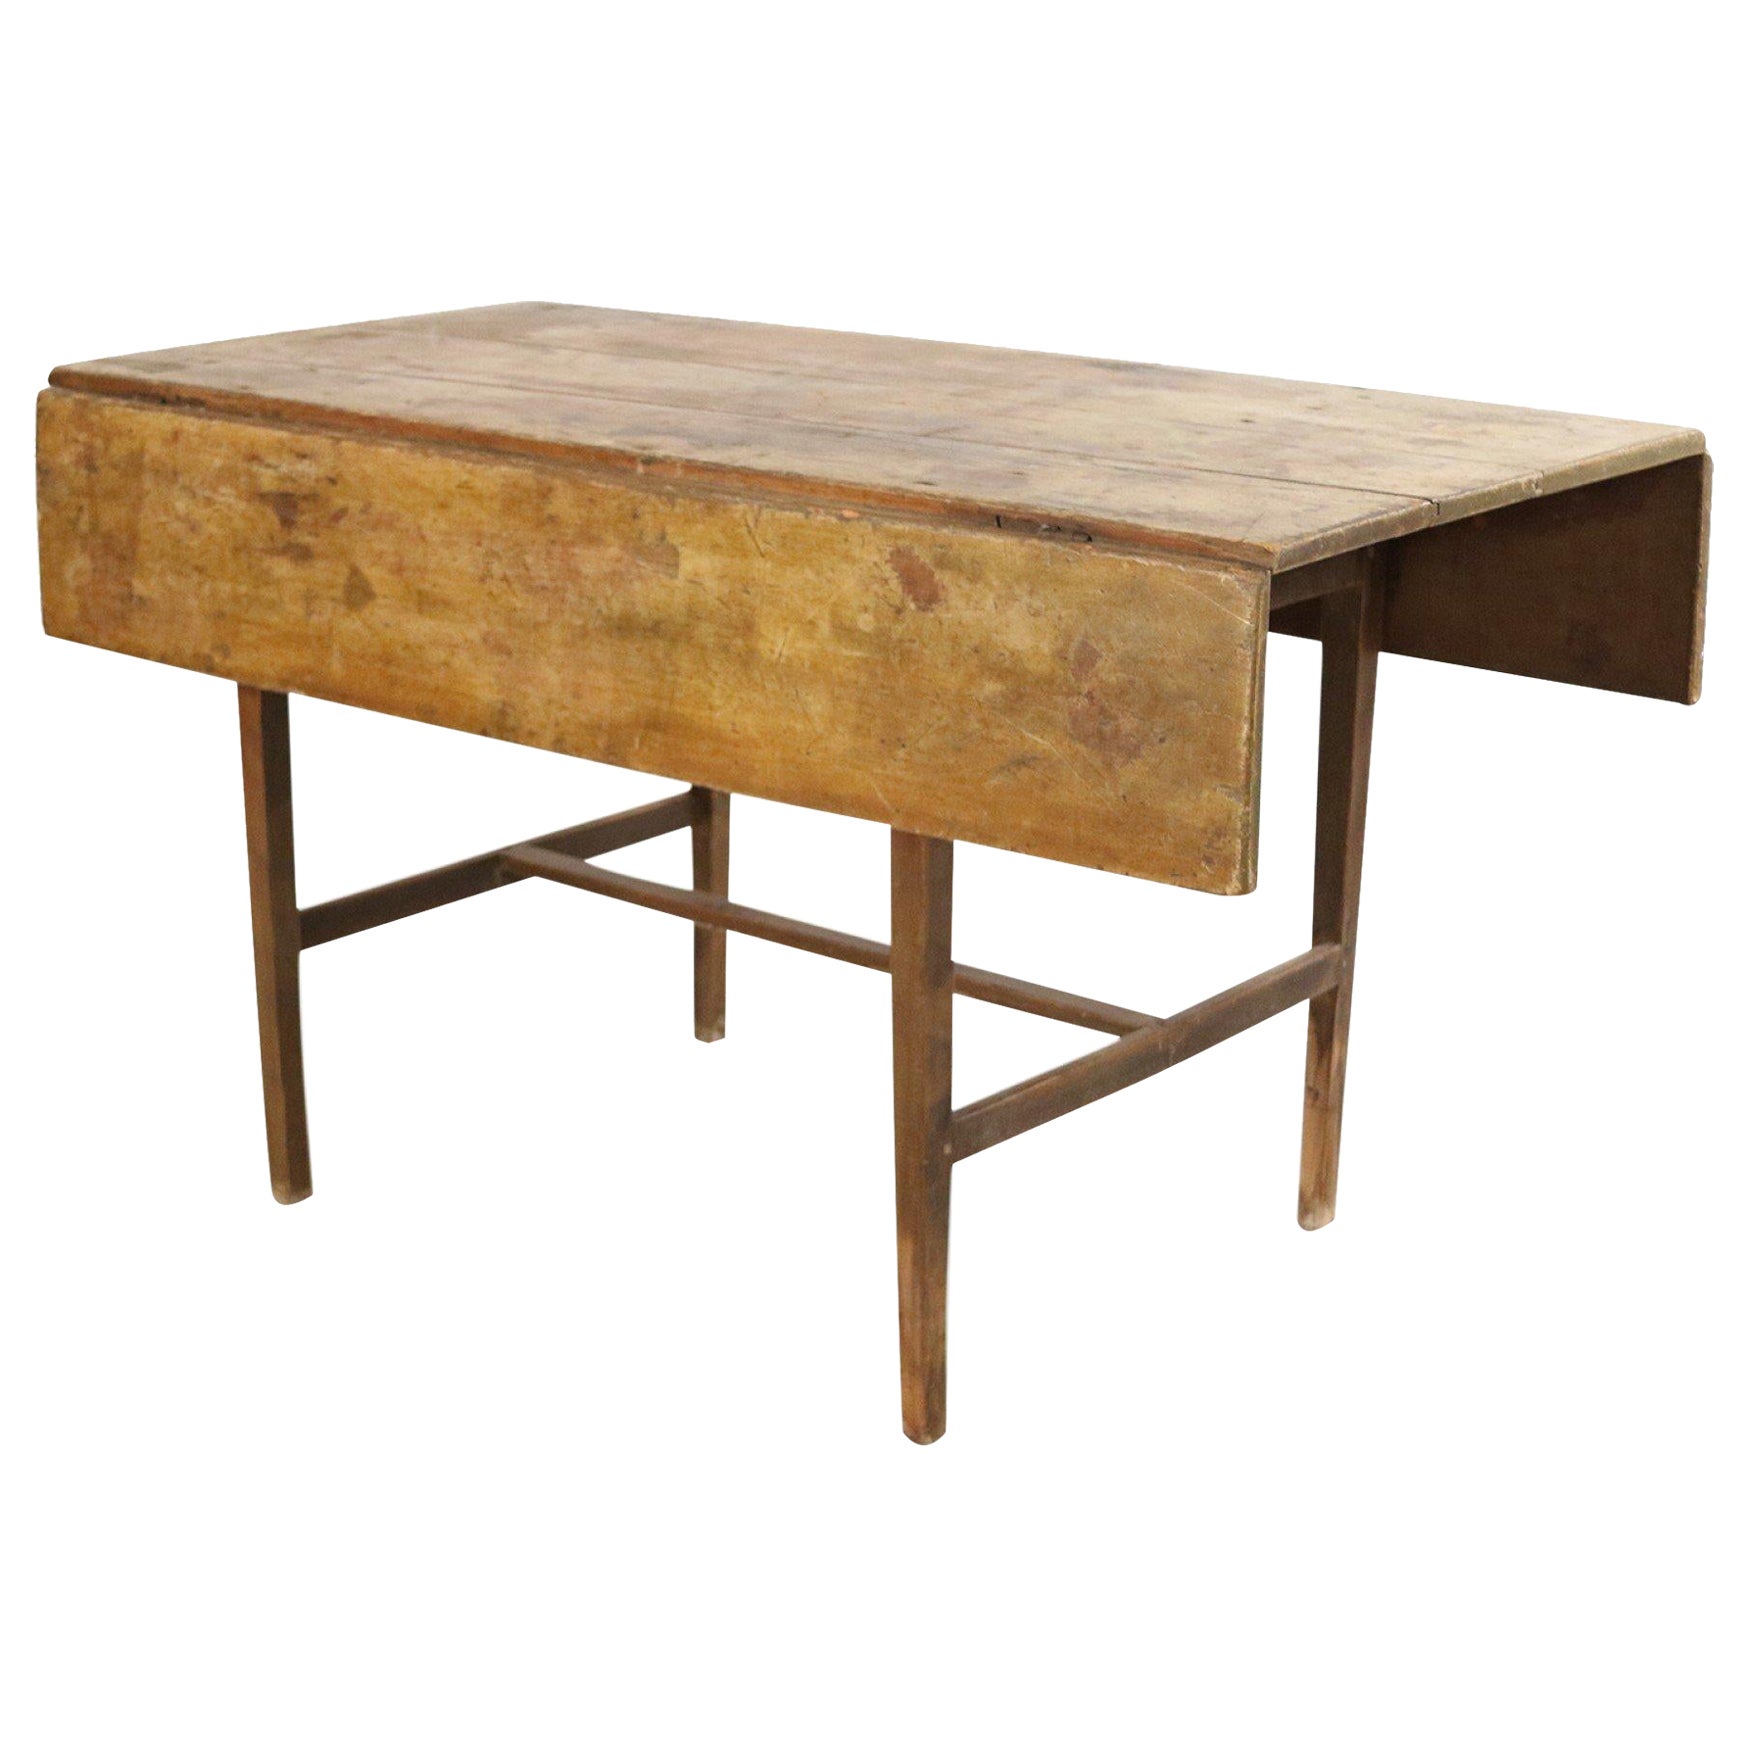 American Country Rustic Pine Wood Drop Leaf Dining Table